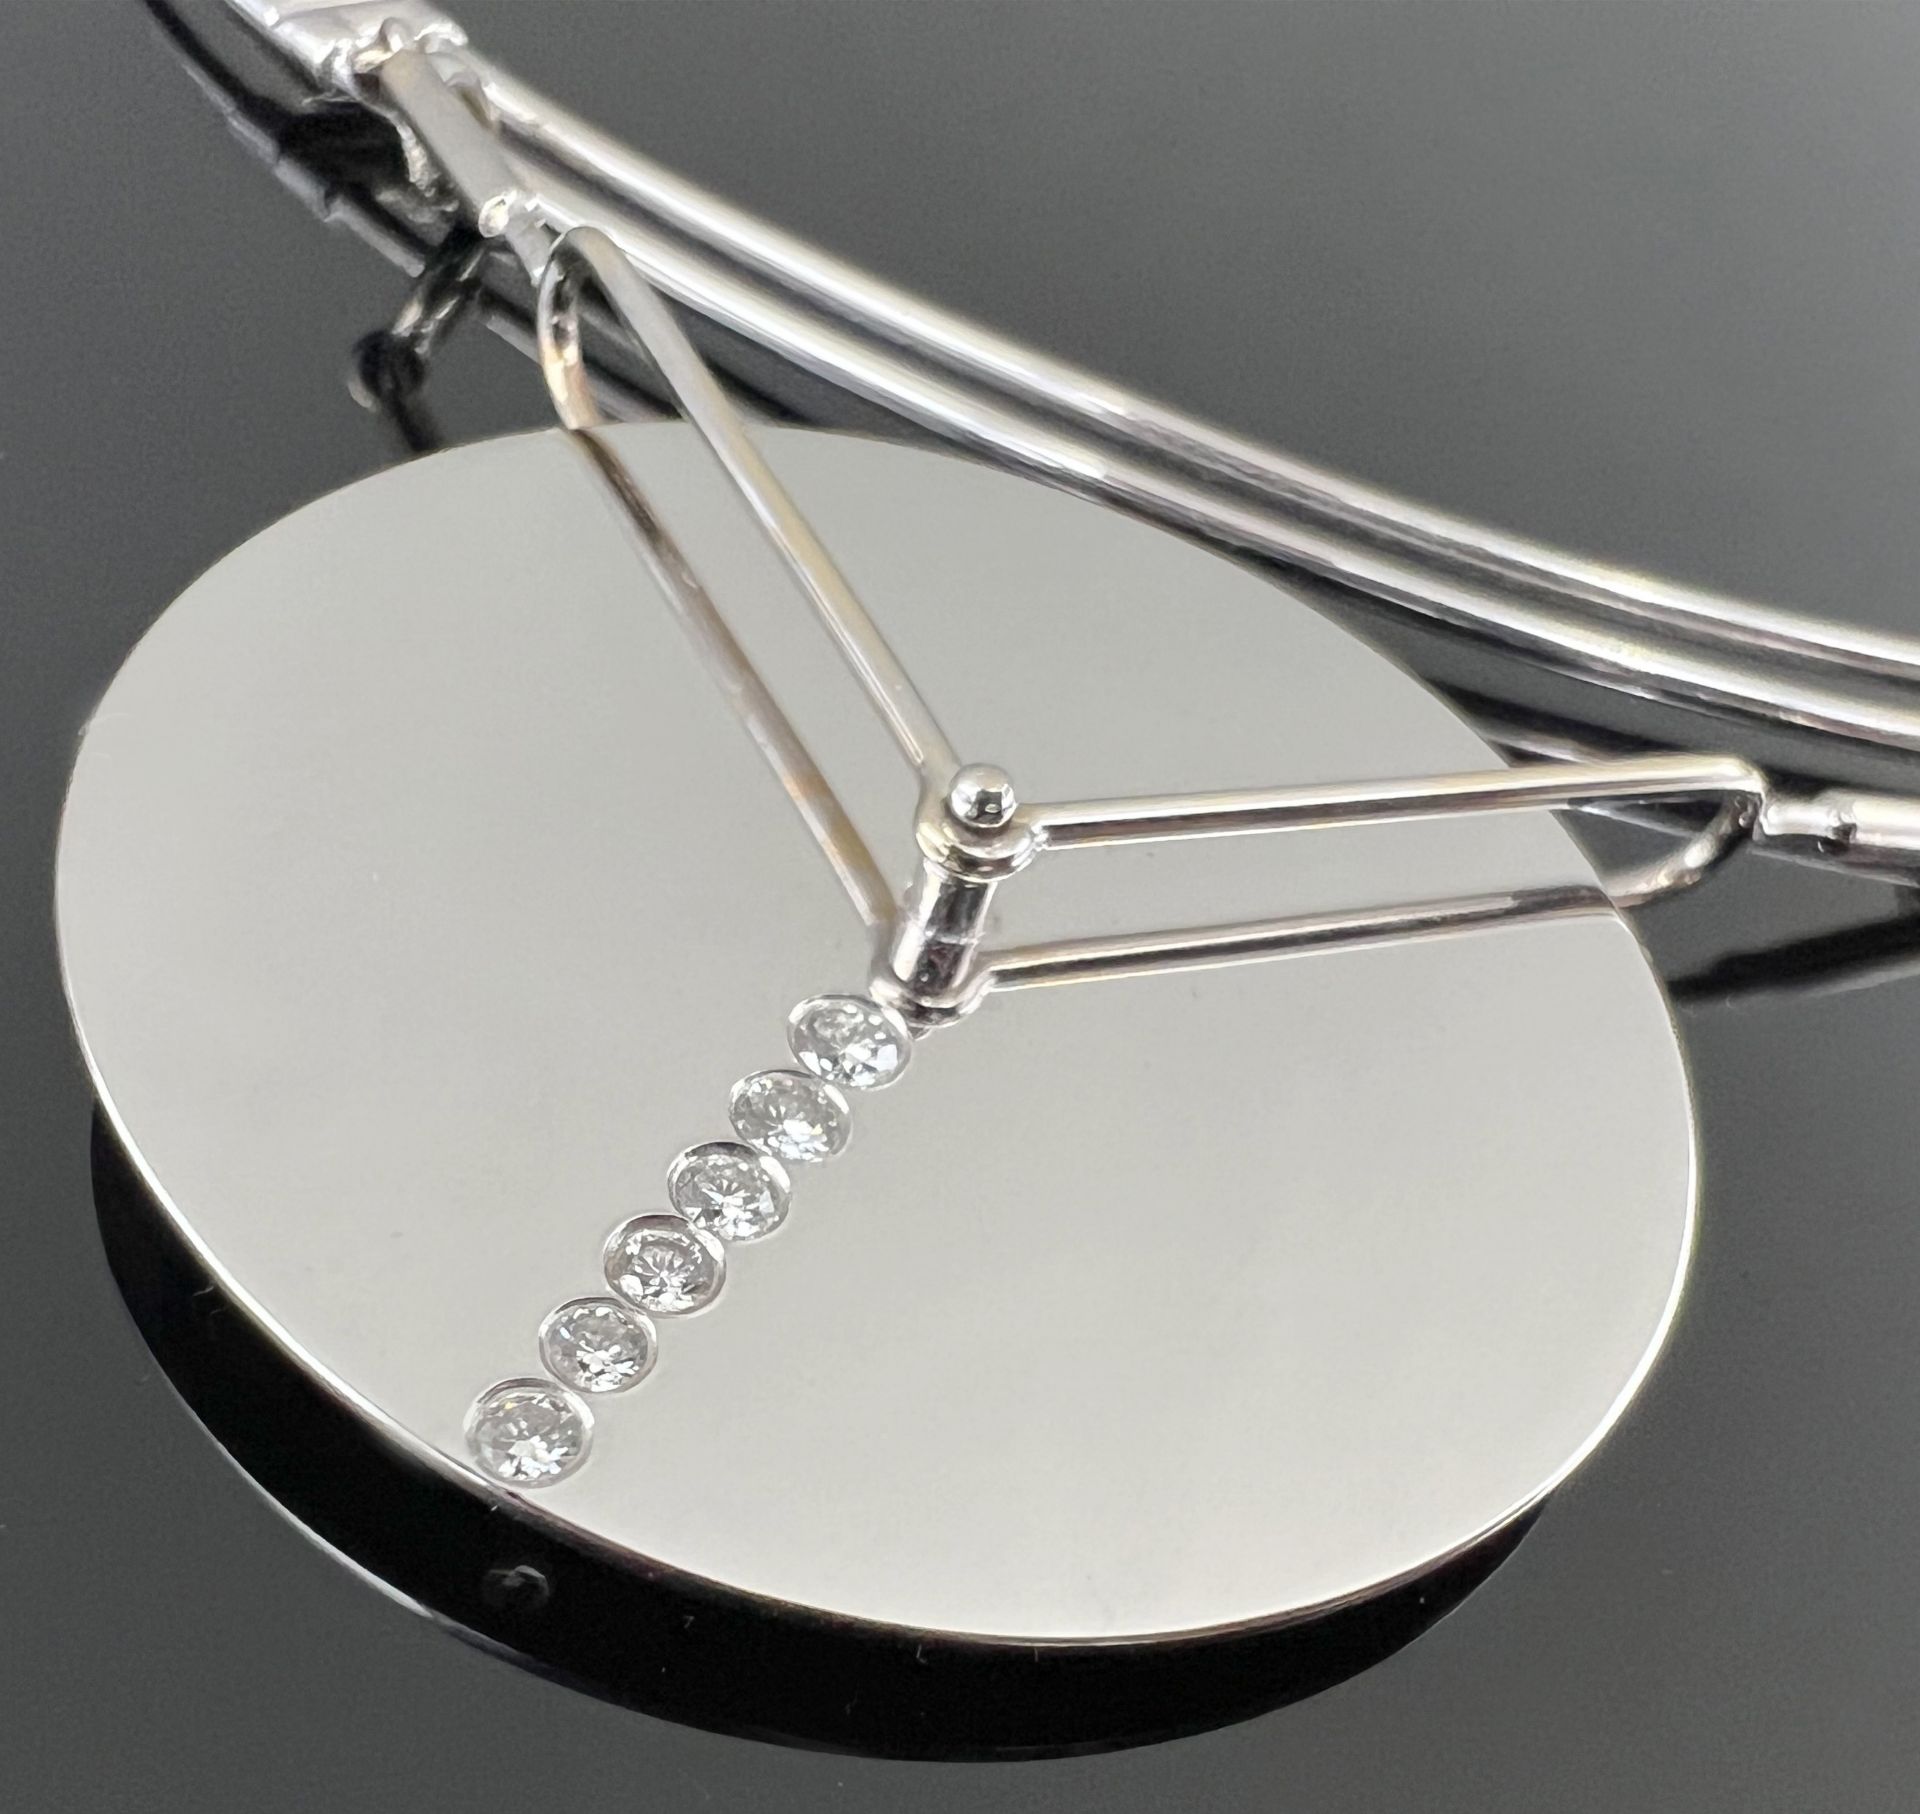 Necklace 750 white gold. Pendant with 6 diamonds. Goldsmith Steck. - Image 2 of 5